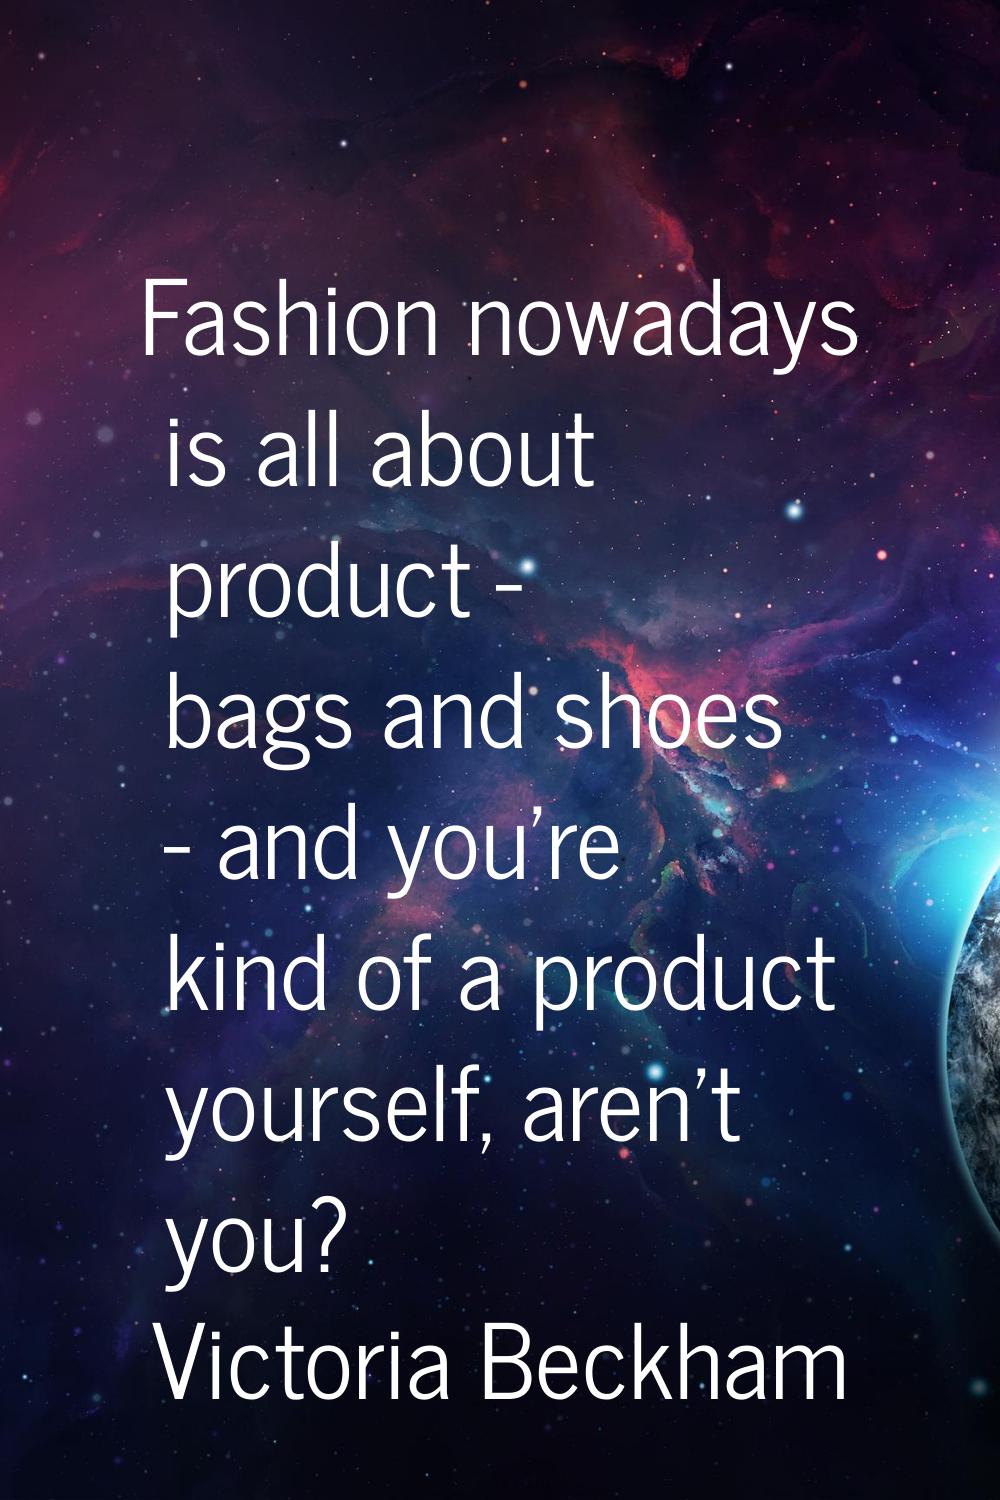 Fashion nowadays is all about product - bags and shoes - and you're kind of a product yourself, are